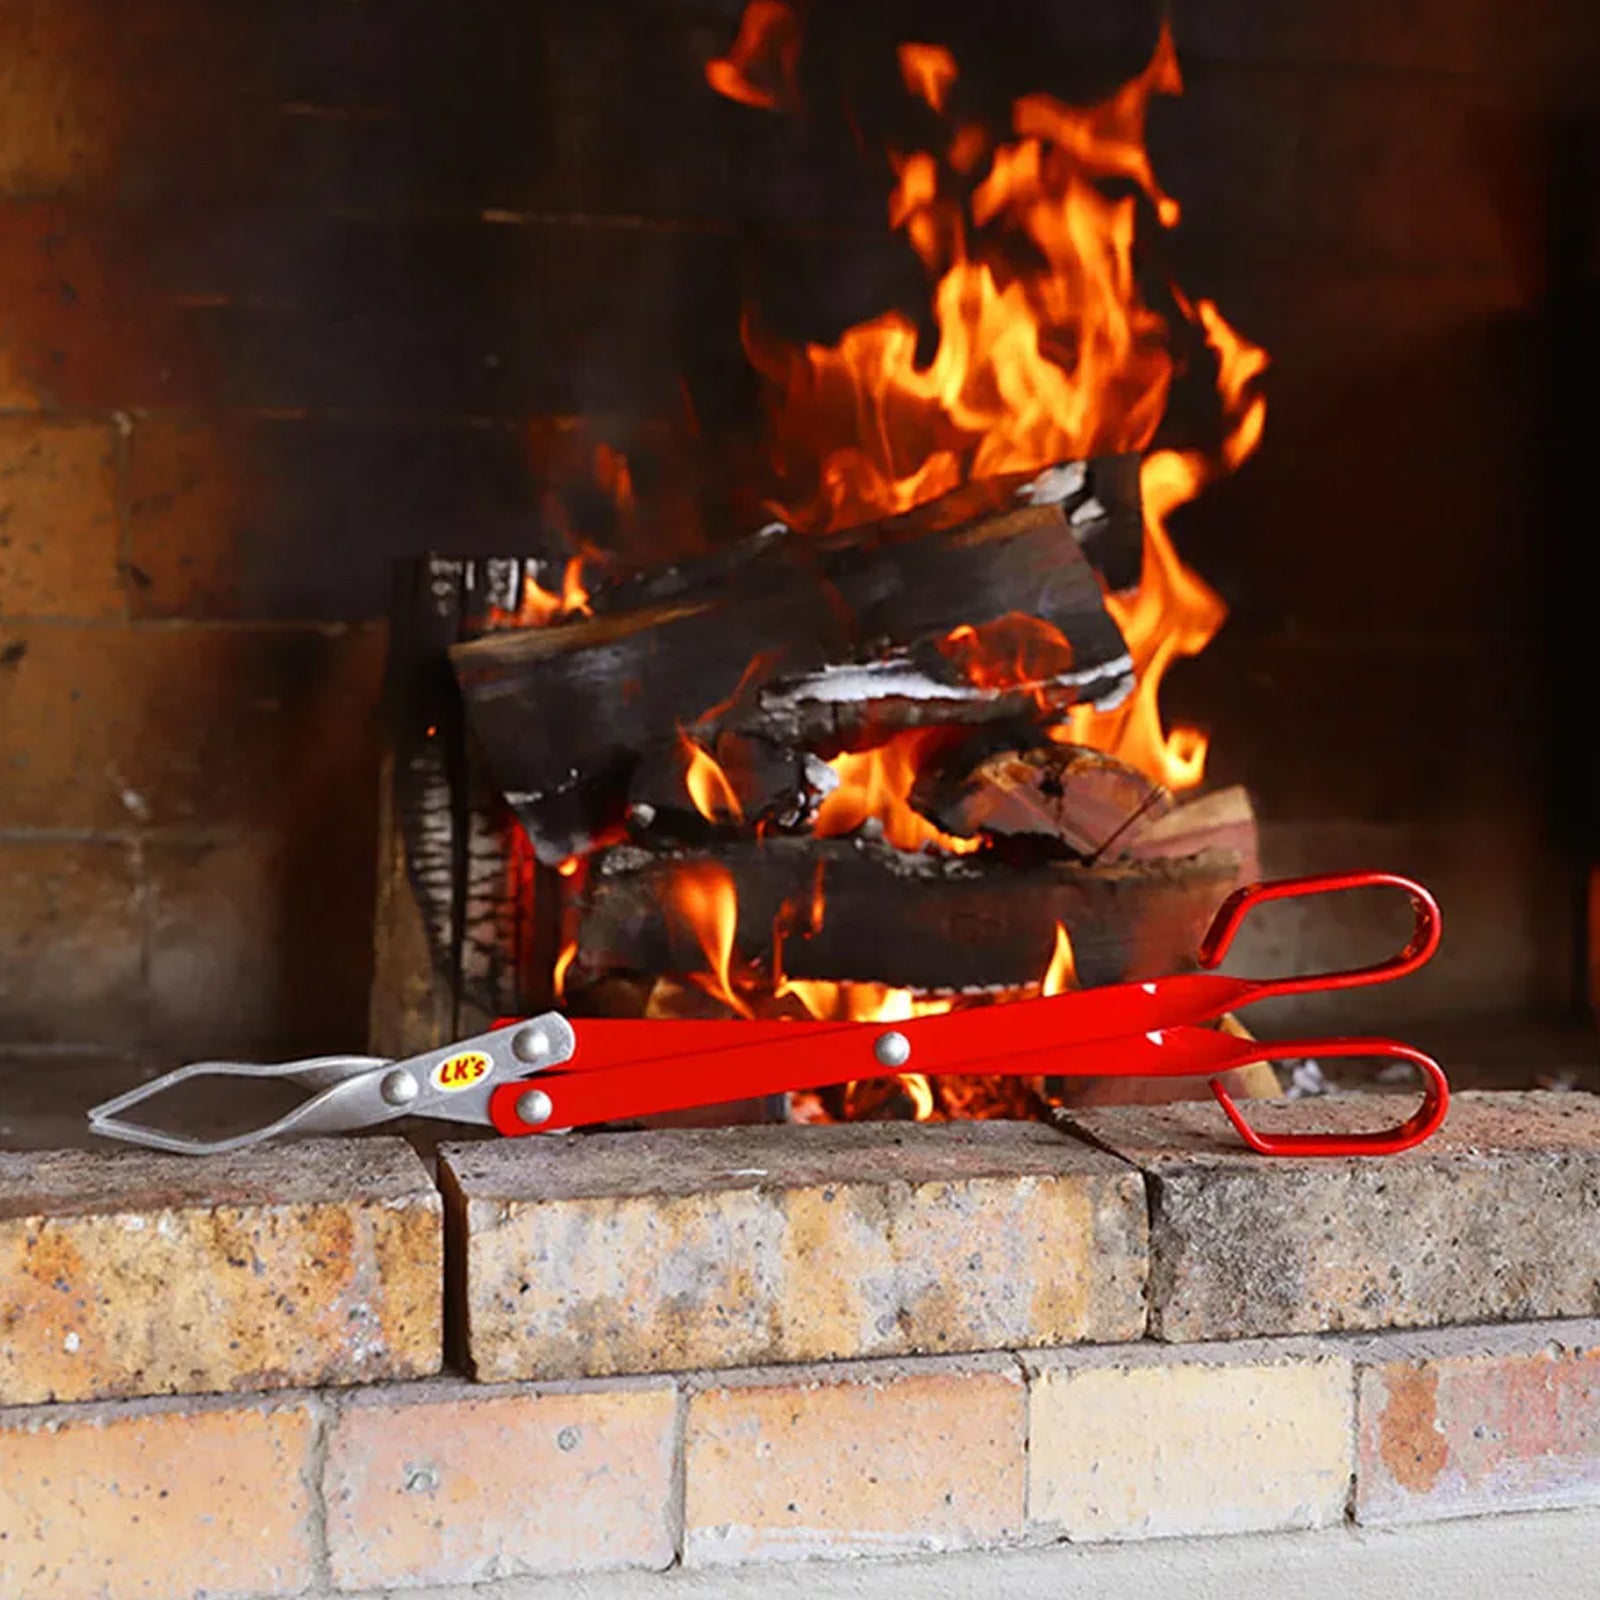 Aluminium Barbecue Tongs with Fireplace in the Background